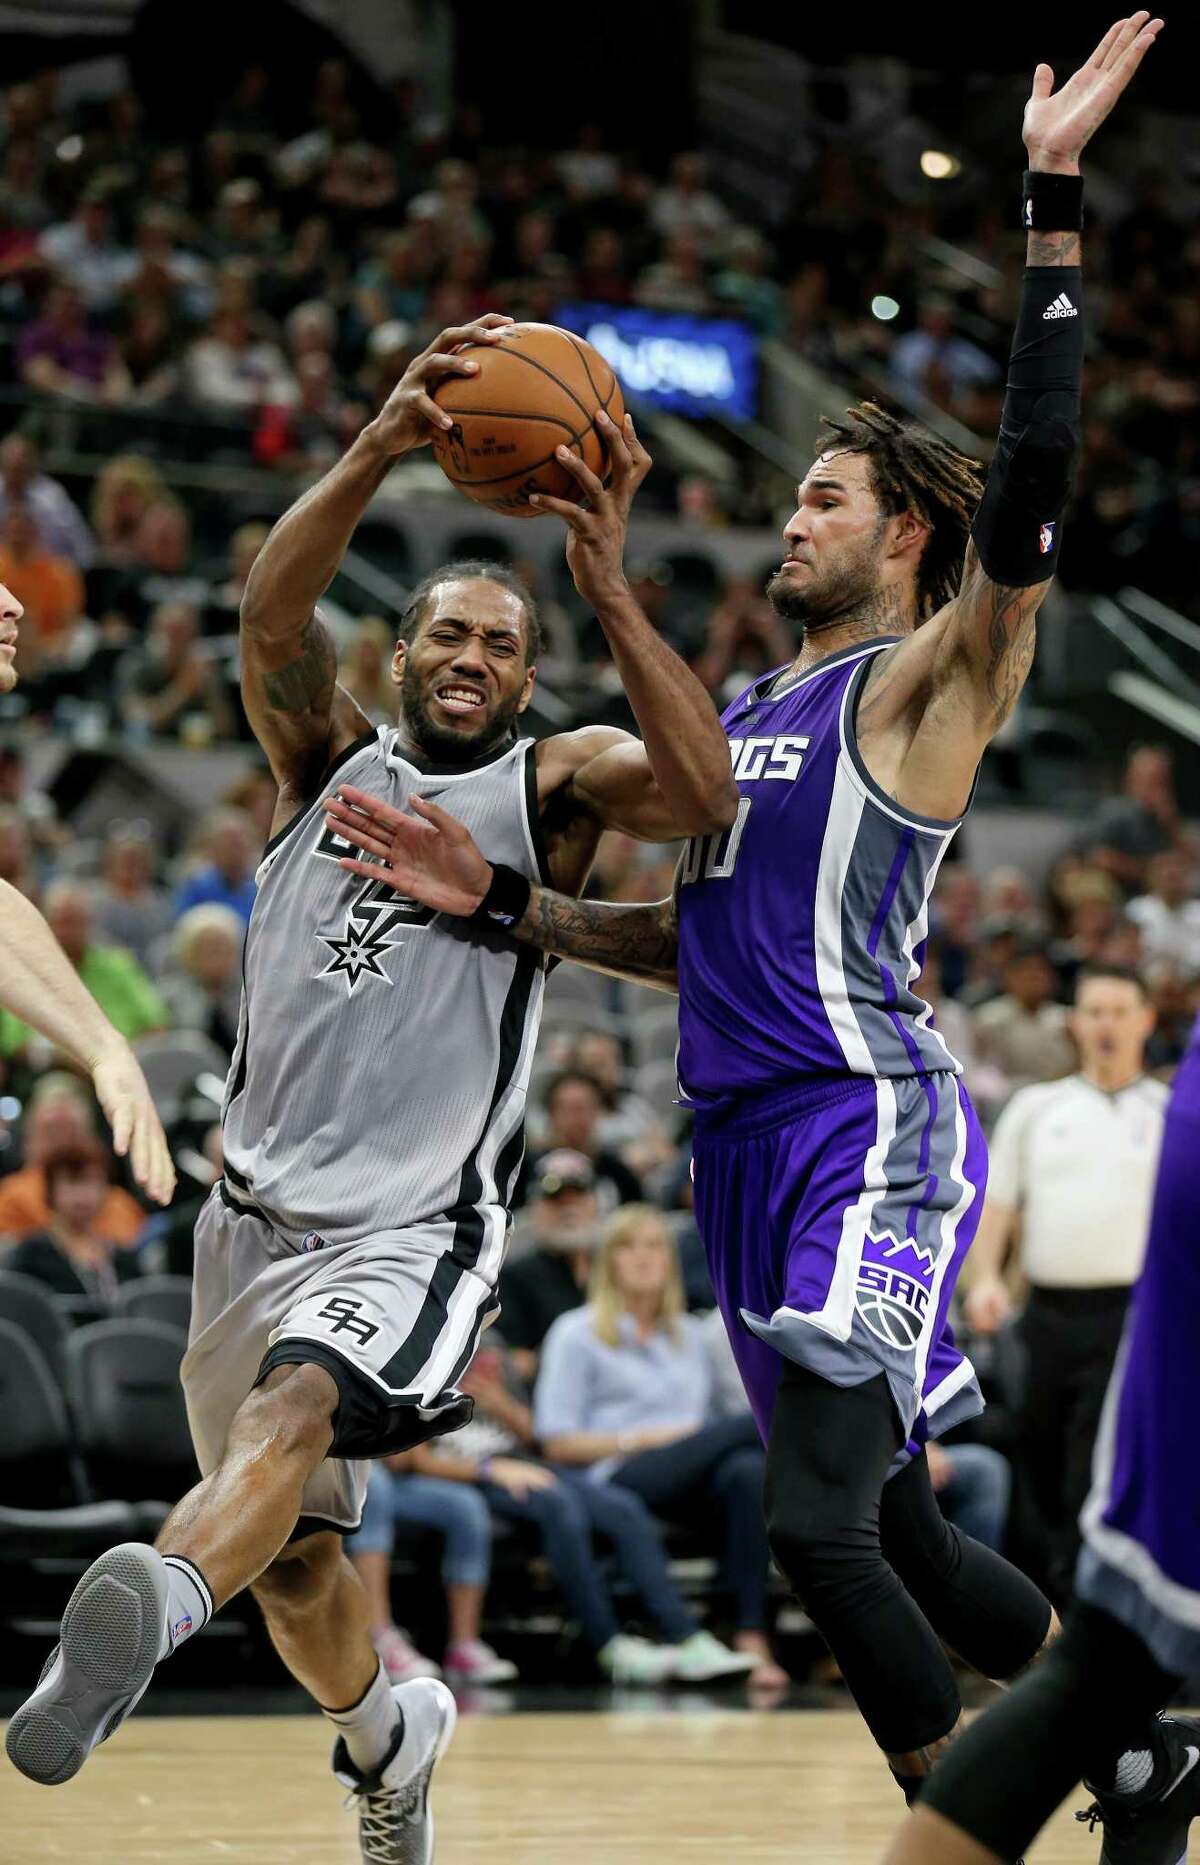 Spurs’ Kawhi Leonard drives around the Sacramento Kings’ Willie Cauley-Stein during second half action on March 19, 2017 at the AT&T Center.